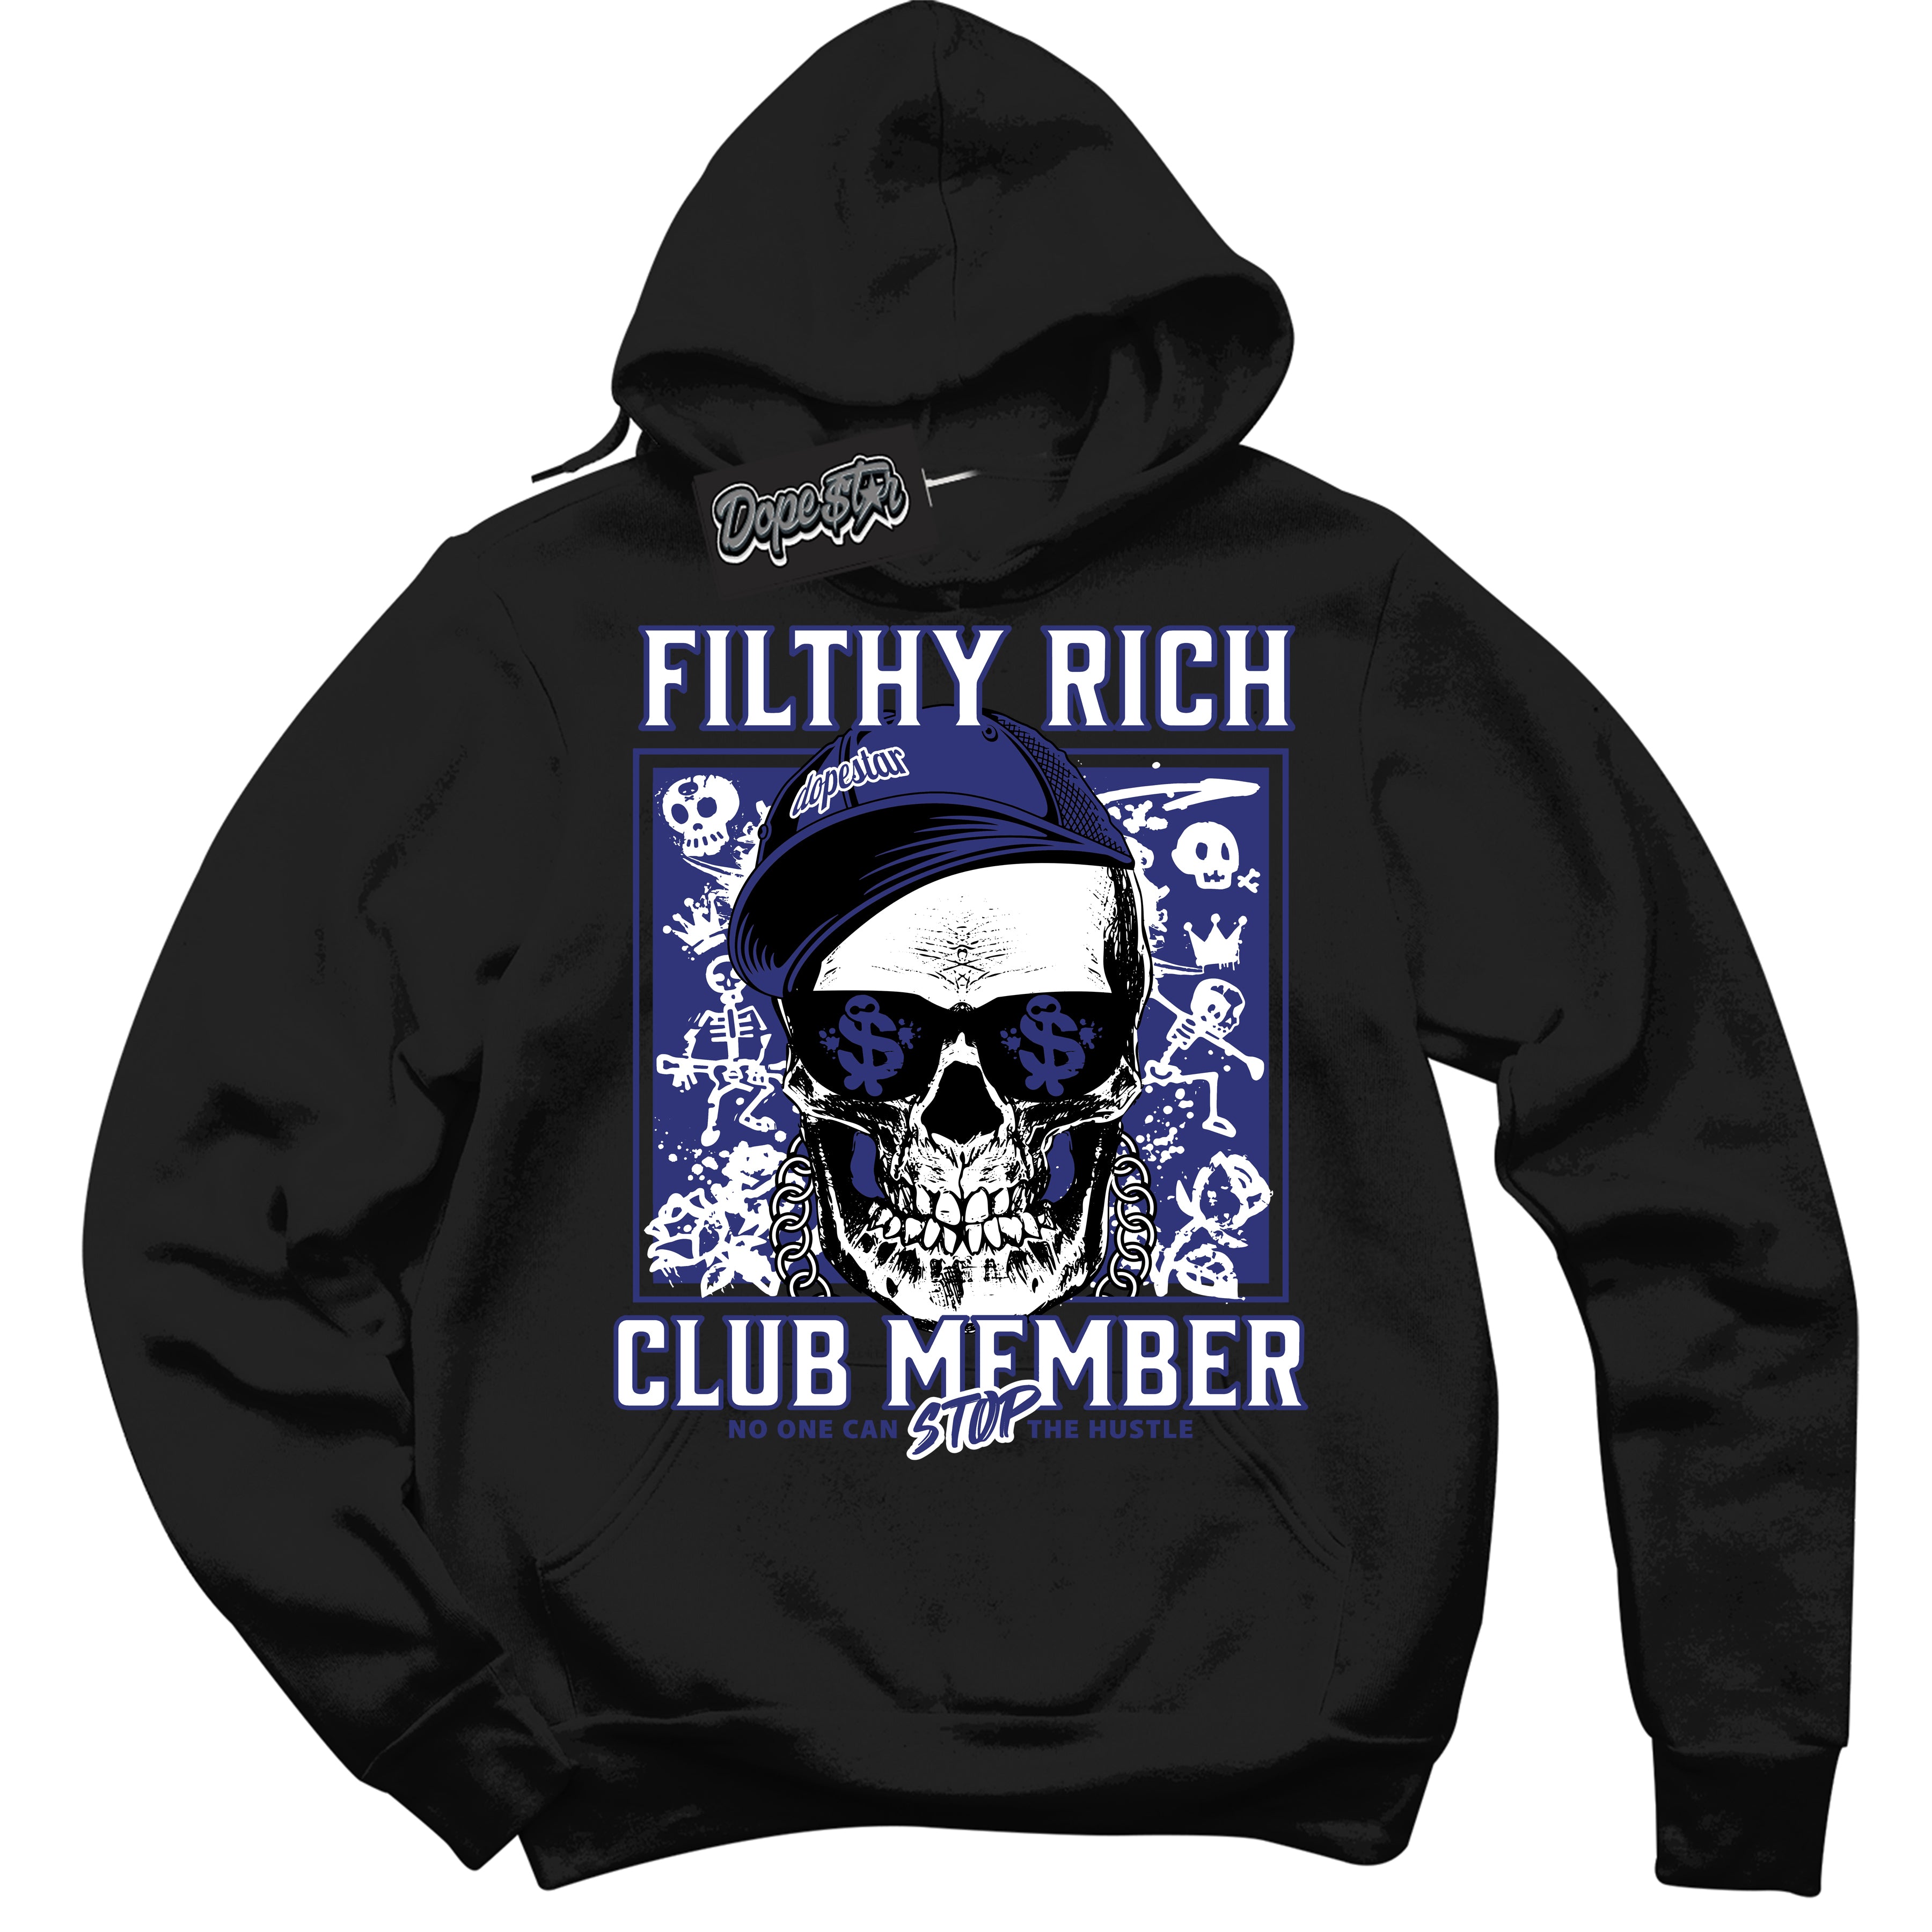 Cool Black Hoodie with “ Filthy Rich ”  design that Perfectly Matches Concord Dunk Sneakers.